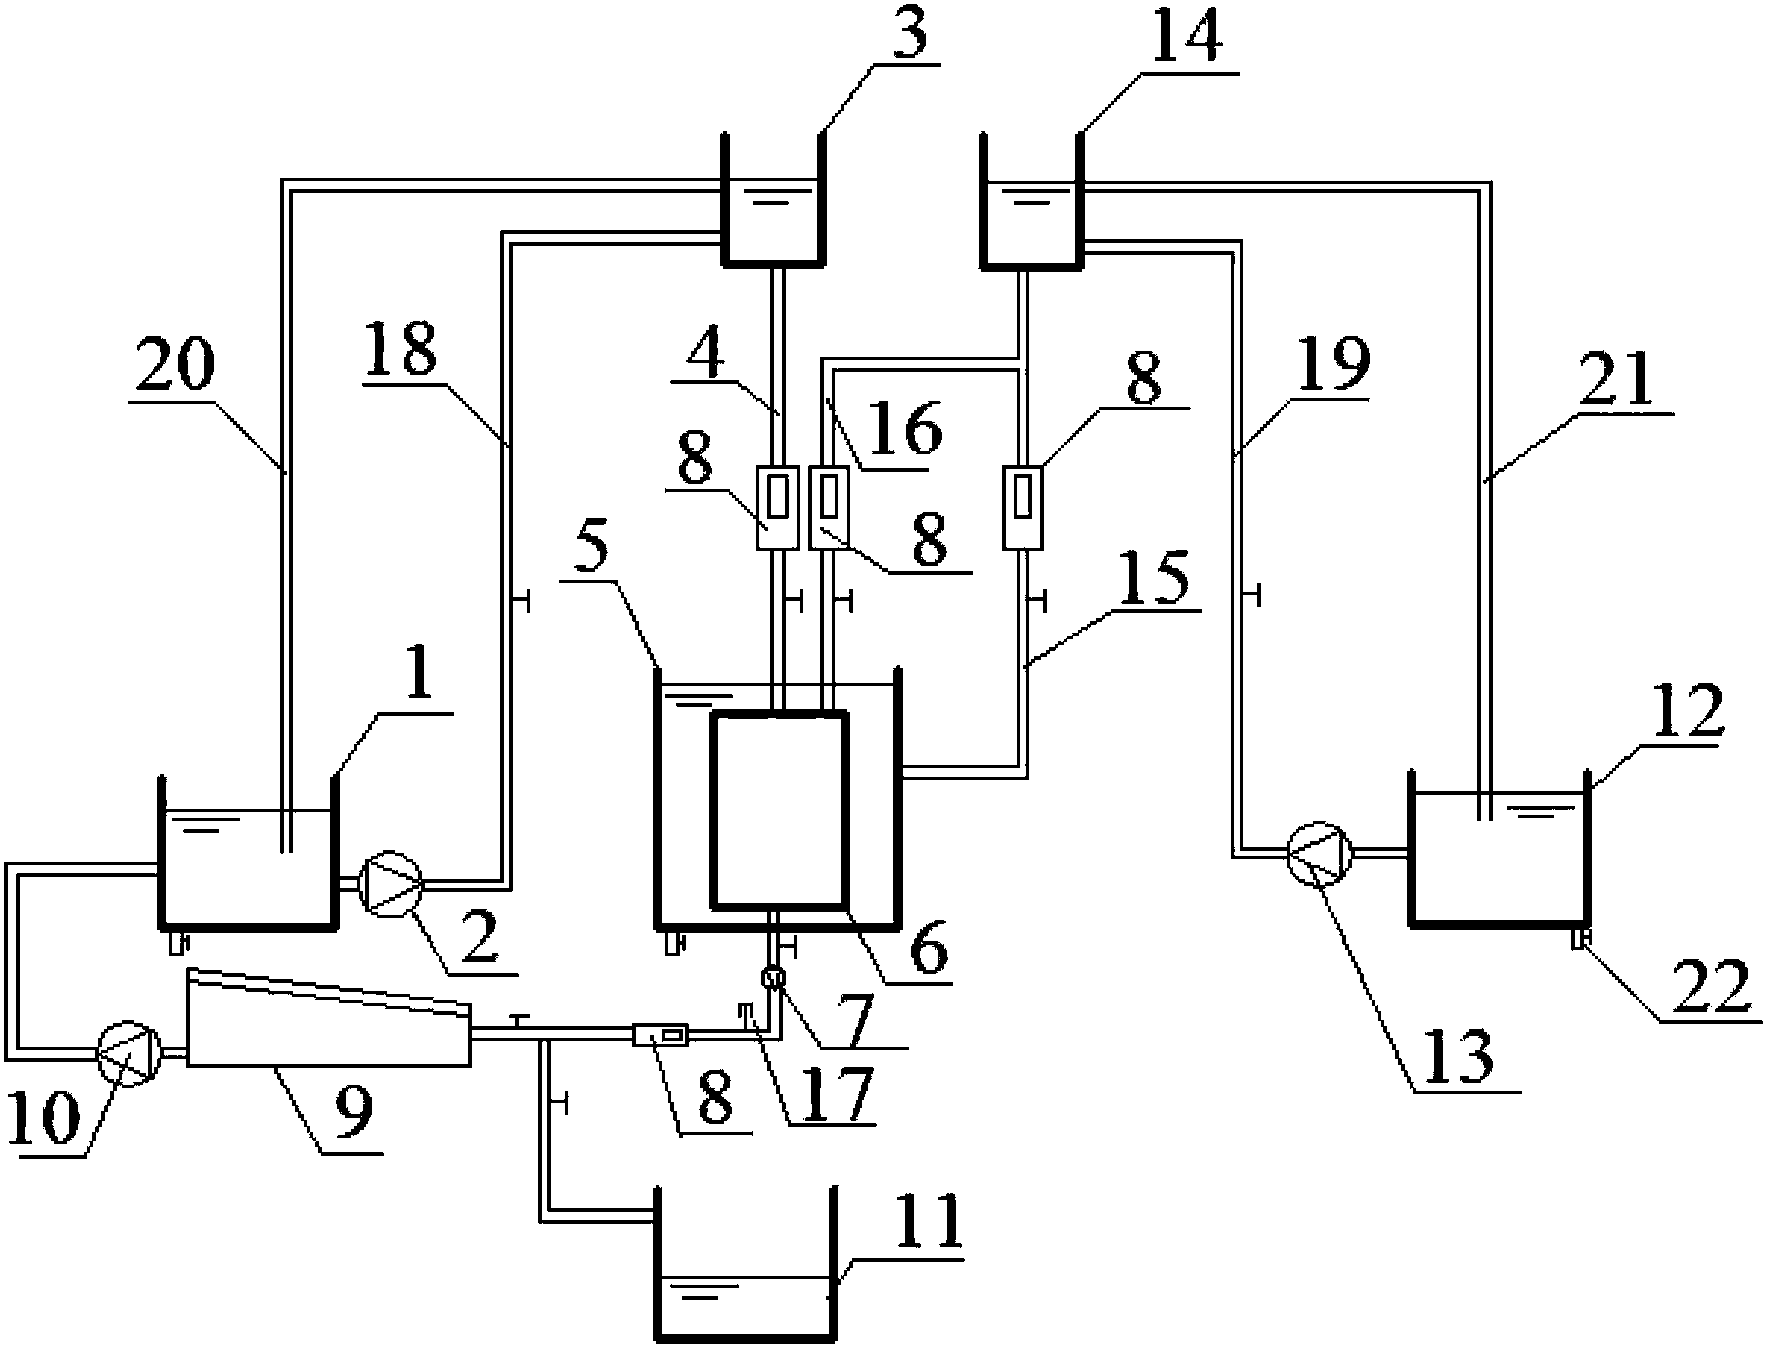 Salt water experiment simulation system used for building ventilation and smoke discharge experiments and using method thereof